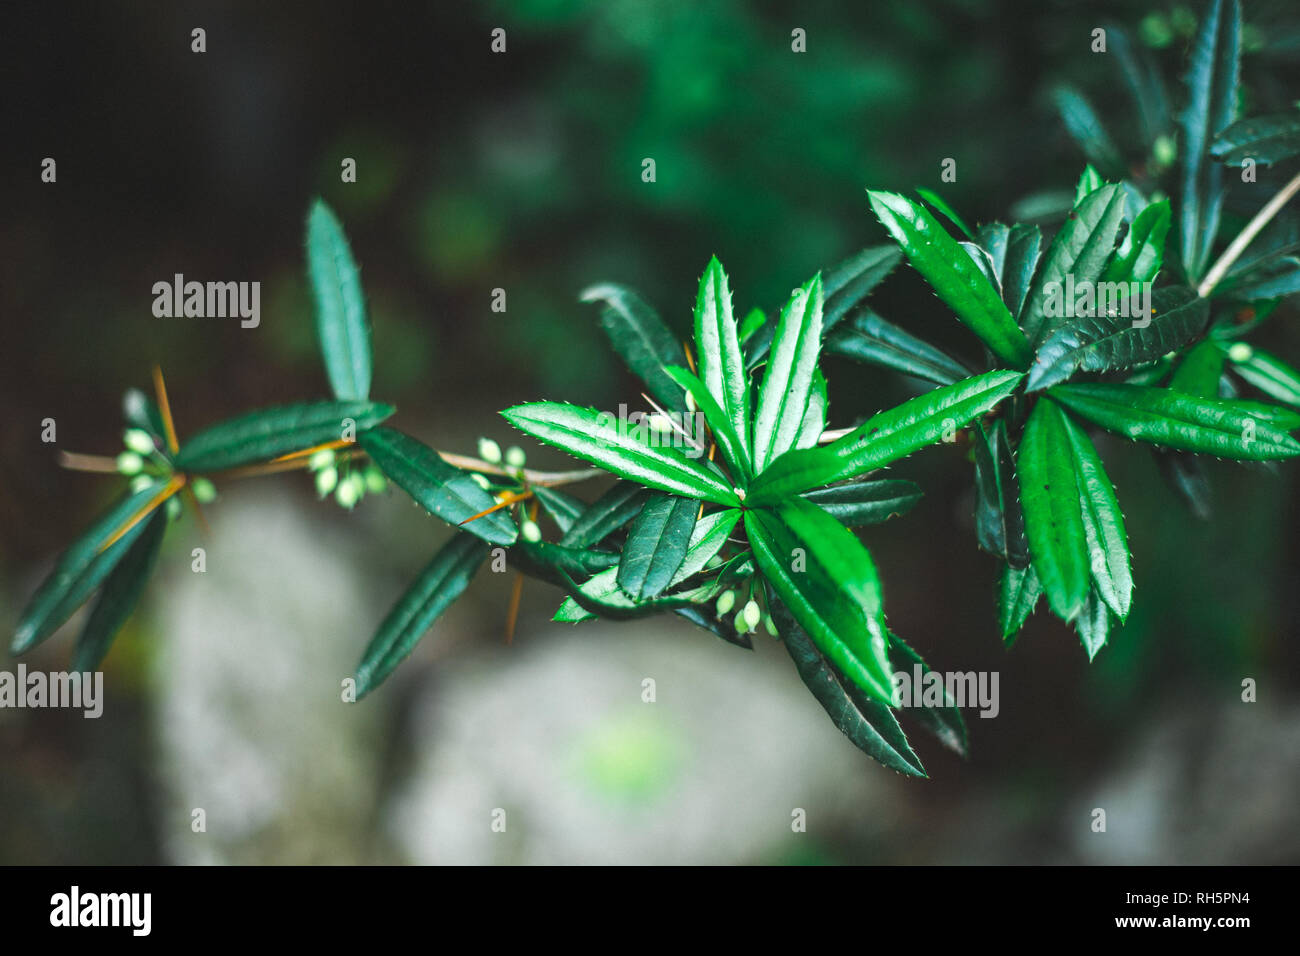 Close-up of spiny thick green leaves with small white berries. Stock Photo